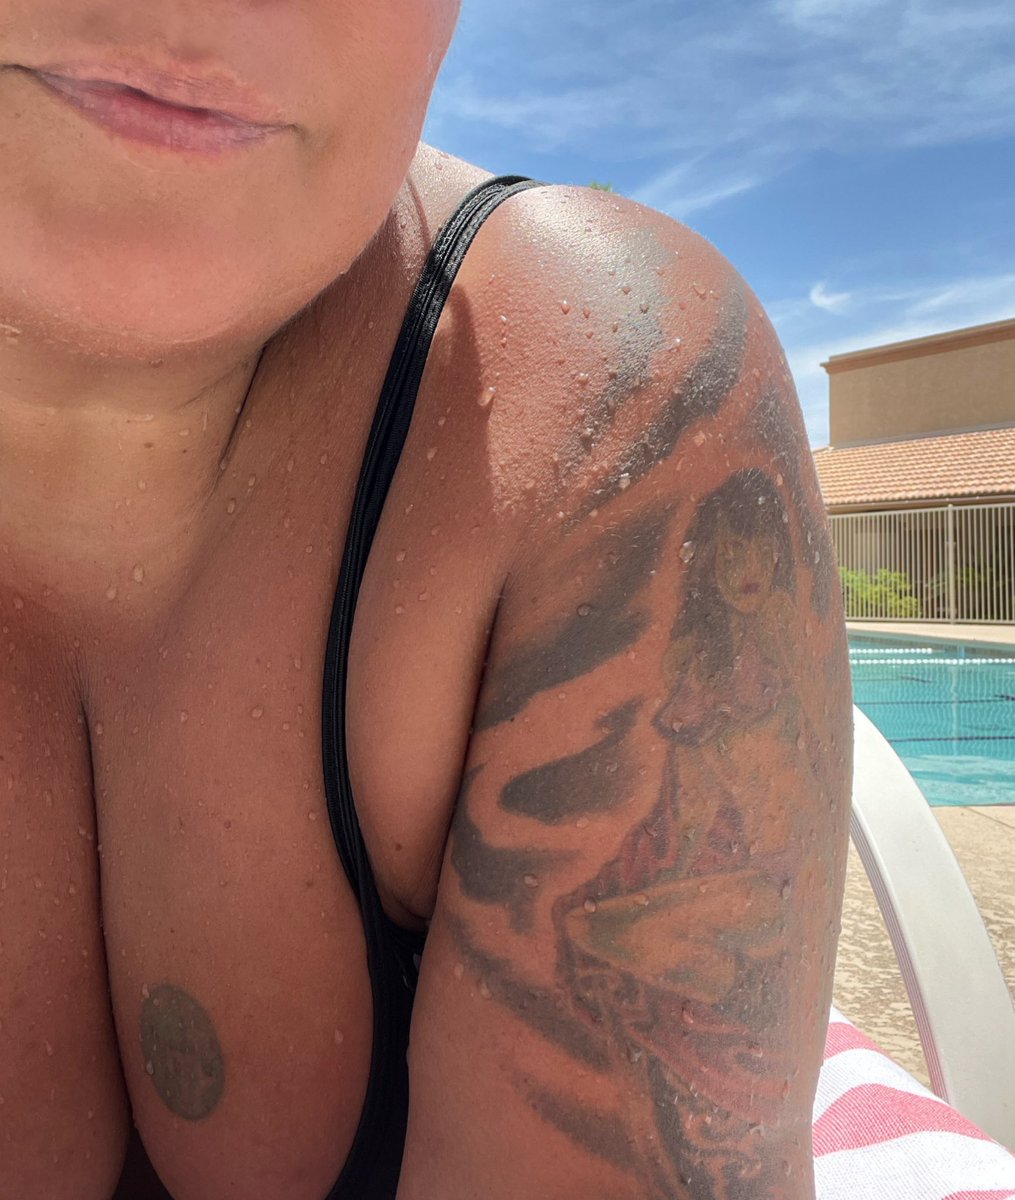 I had to get my pool time done early today. It’s gonna be a scorcher this afternoon 103°🔥🥵